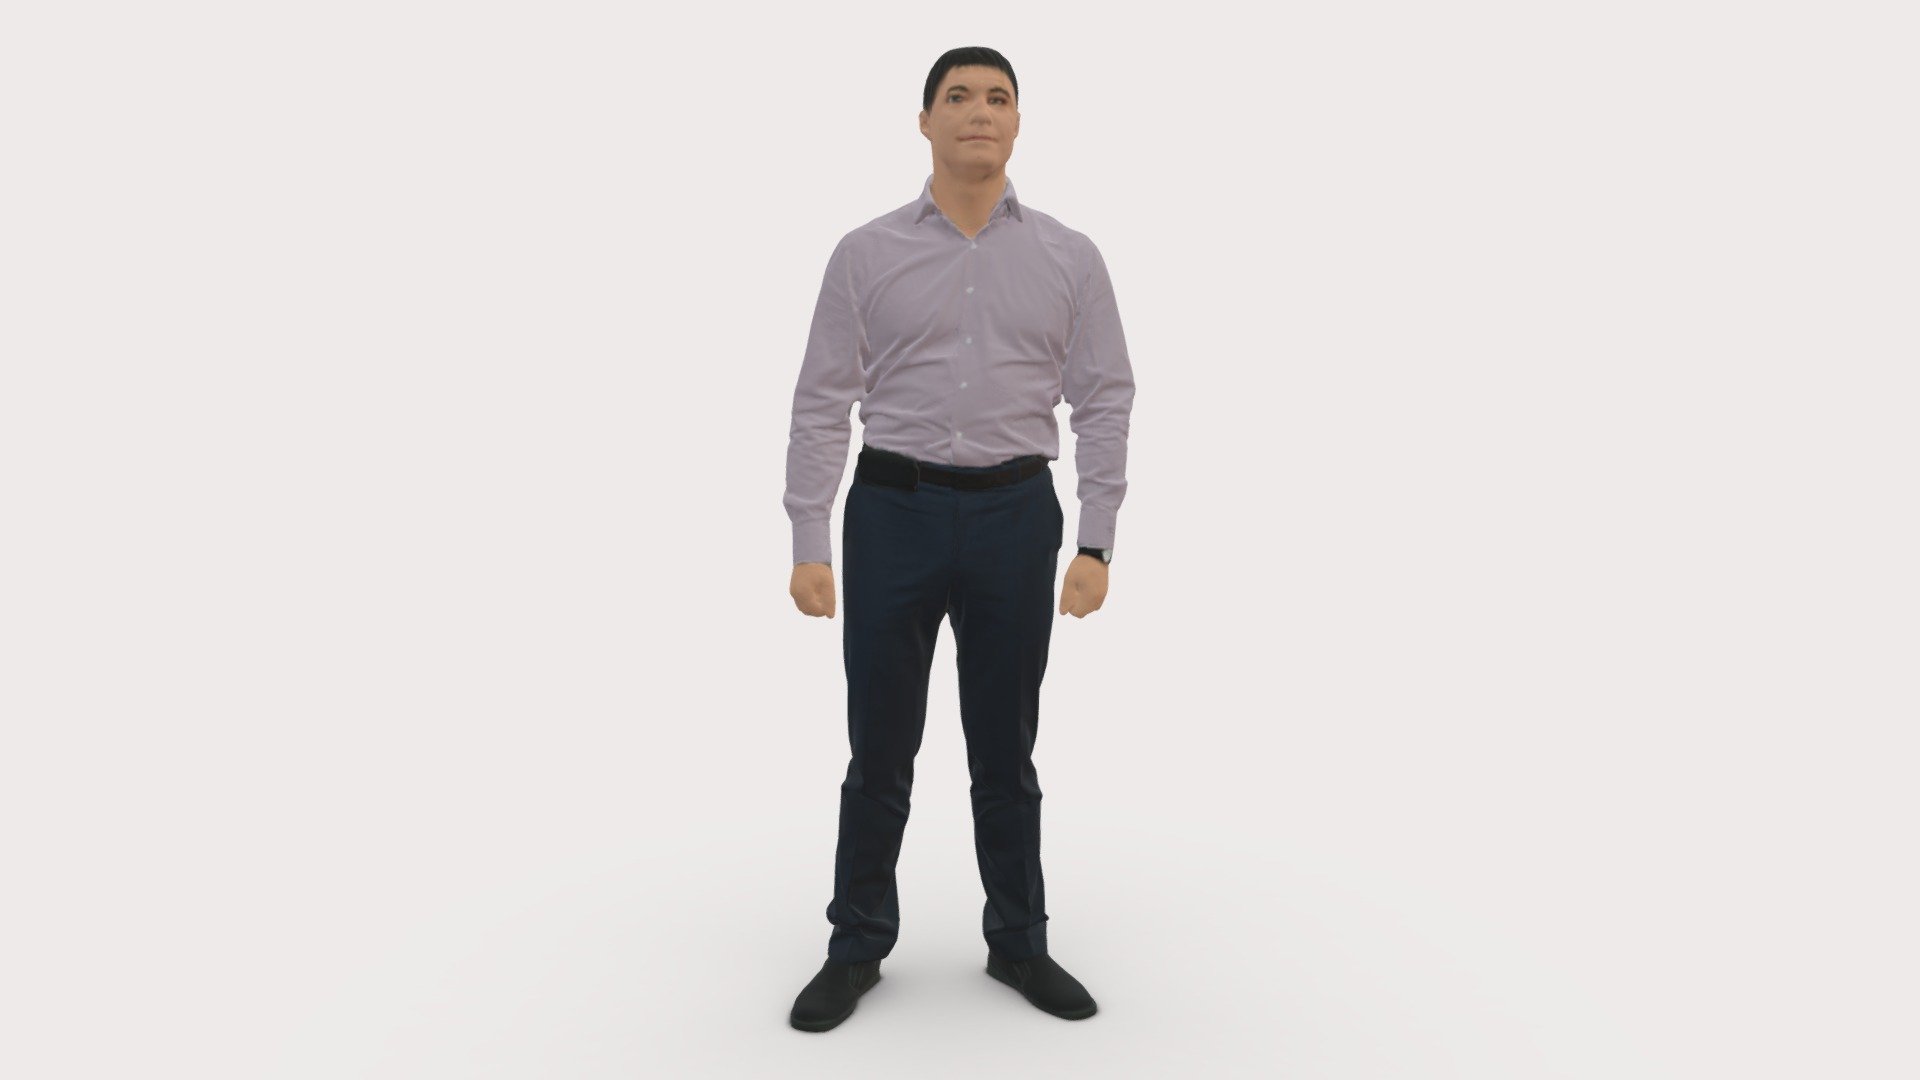 We provide unique 3d scanned models with realistic proportions for closeup and medium-distance views in artworks, paintings and classes. As well as architectural visualization projects.

Main features:




high-end realistic 3d scanned model;

realistic proportions;

highest quality;

low price;

saves you time for more time in landscaping and interiors visualization.

FEATURES 




3d scanned model 

Extremely clean

Edge Loops based

smoothable

symmetrical

professional quality UV map

high level of detail

high resolution textures

real-world scale

system unit: cm

TEXTURES 




Textural Resolution: 4096 x 4096

Color Map

The model is suitable for stereolithography 3d printing 

The model is also ready for fullcolour 3d printing - Young man in lilac shirt 0642 - Buy Royalty Free 3D model by 3DFarm 3d model